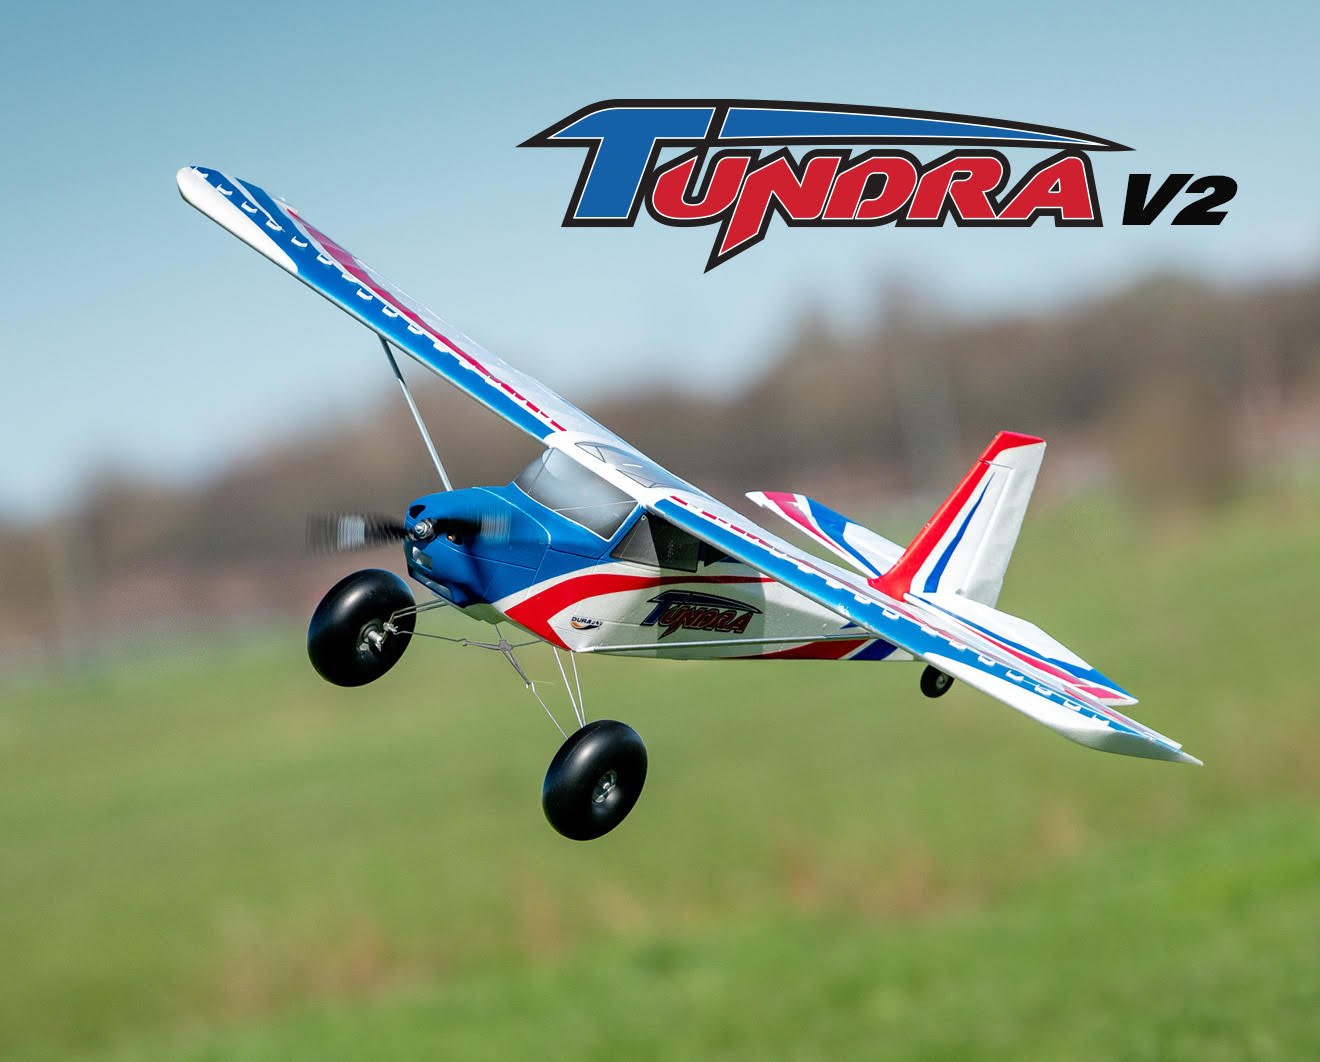 The Tundra V2 - Extremely Versatile and Fun to fly!